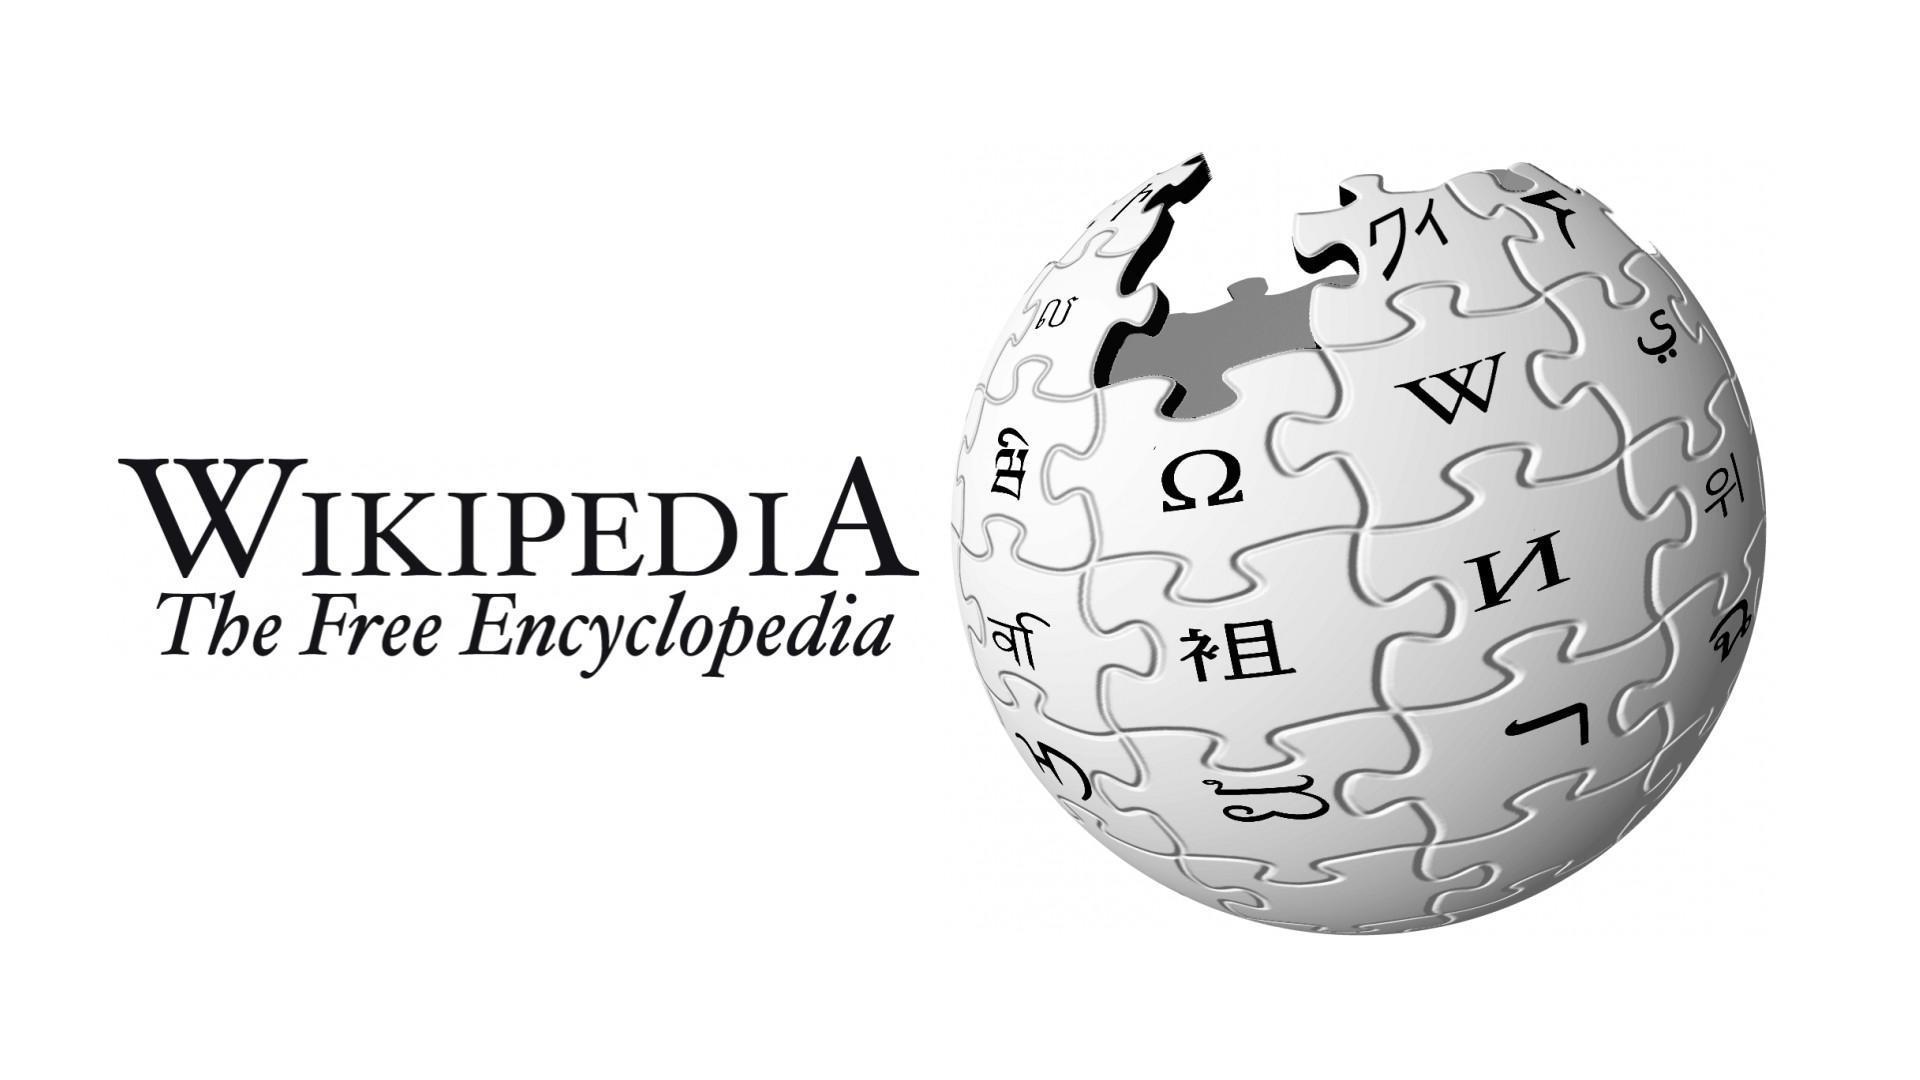 Internet Encyclopedia Logo - Wikipedia app relaunched on iStore ahead of iOS 8 integration